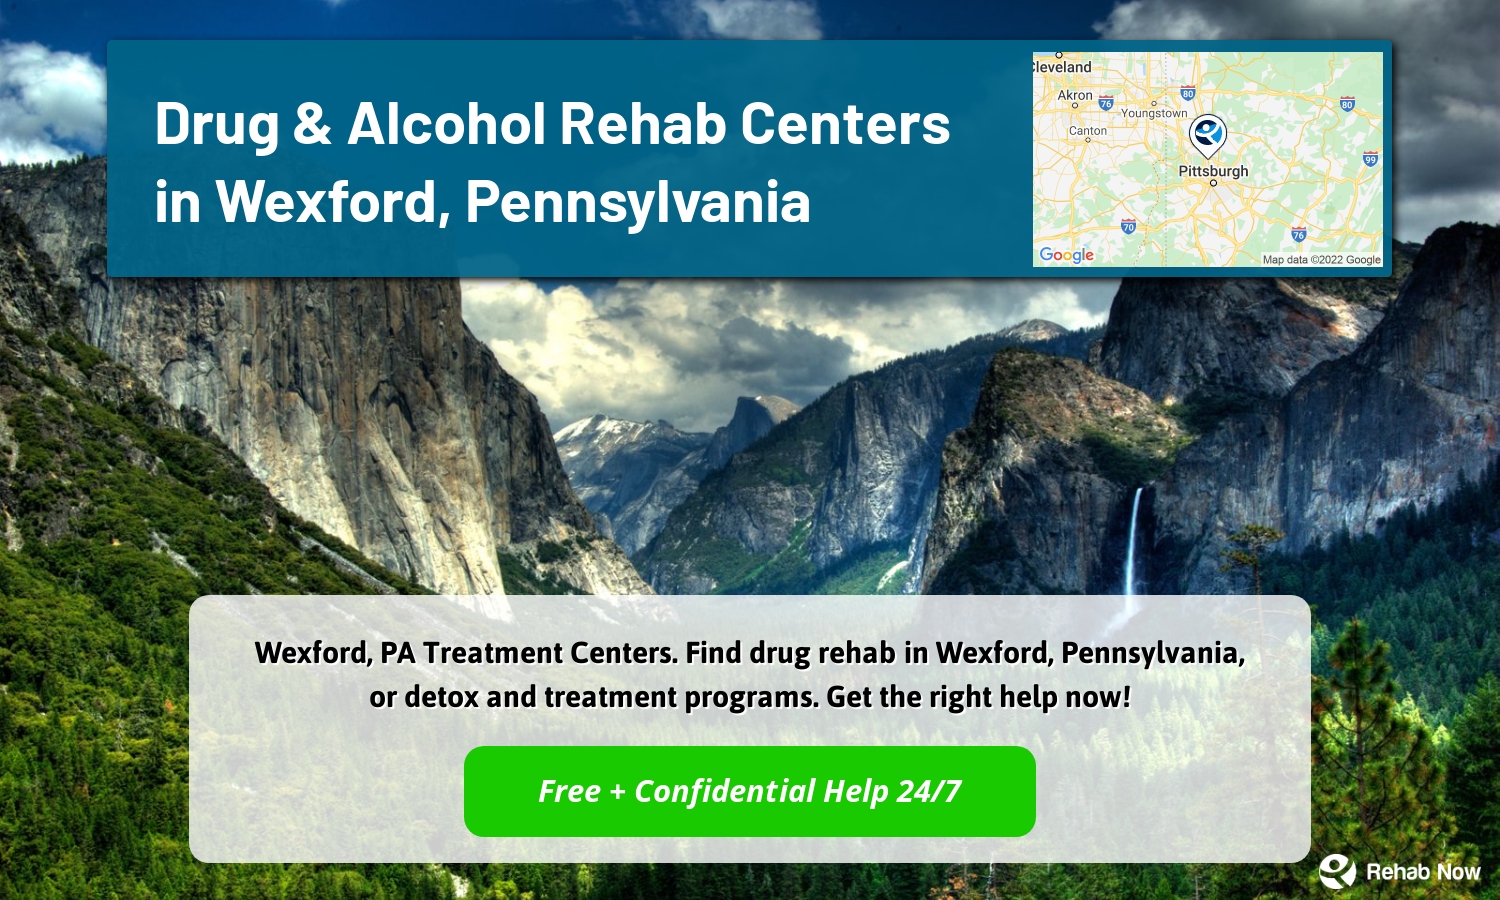 Wexford, PA Treatment Centers. Find drug rehab in Wexford, Pennsylvania, or detox and treatment programs. Get the right help now!